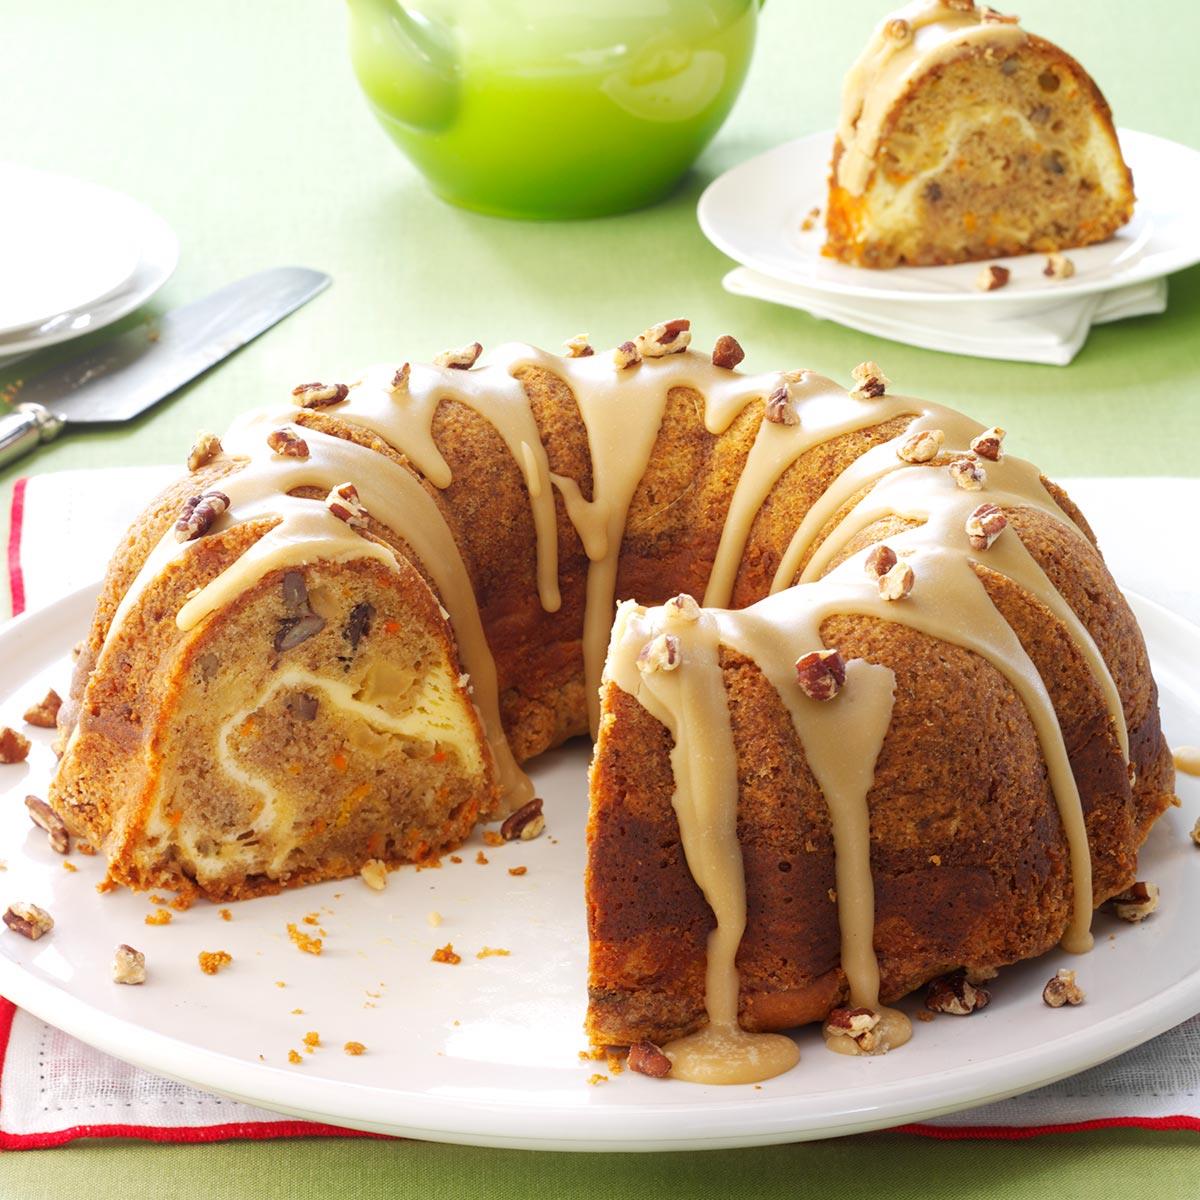 An Apple Cake That's Mostly Apples | TASTE